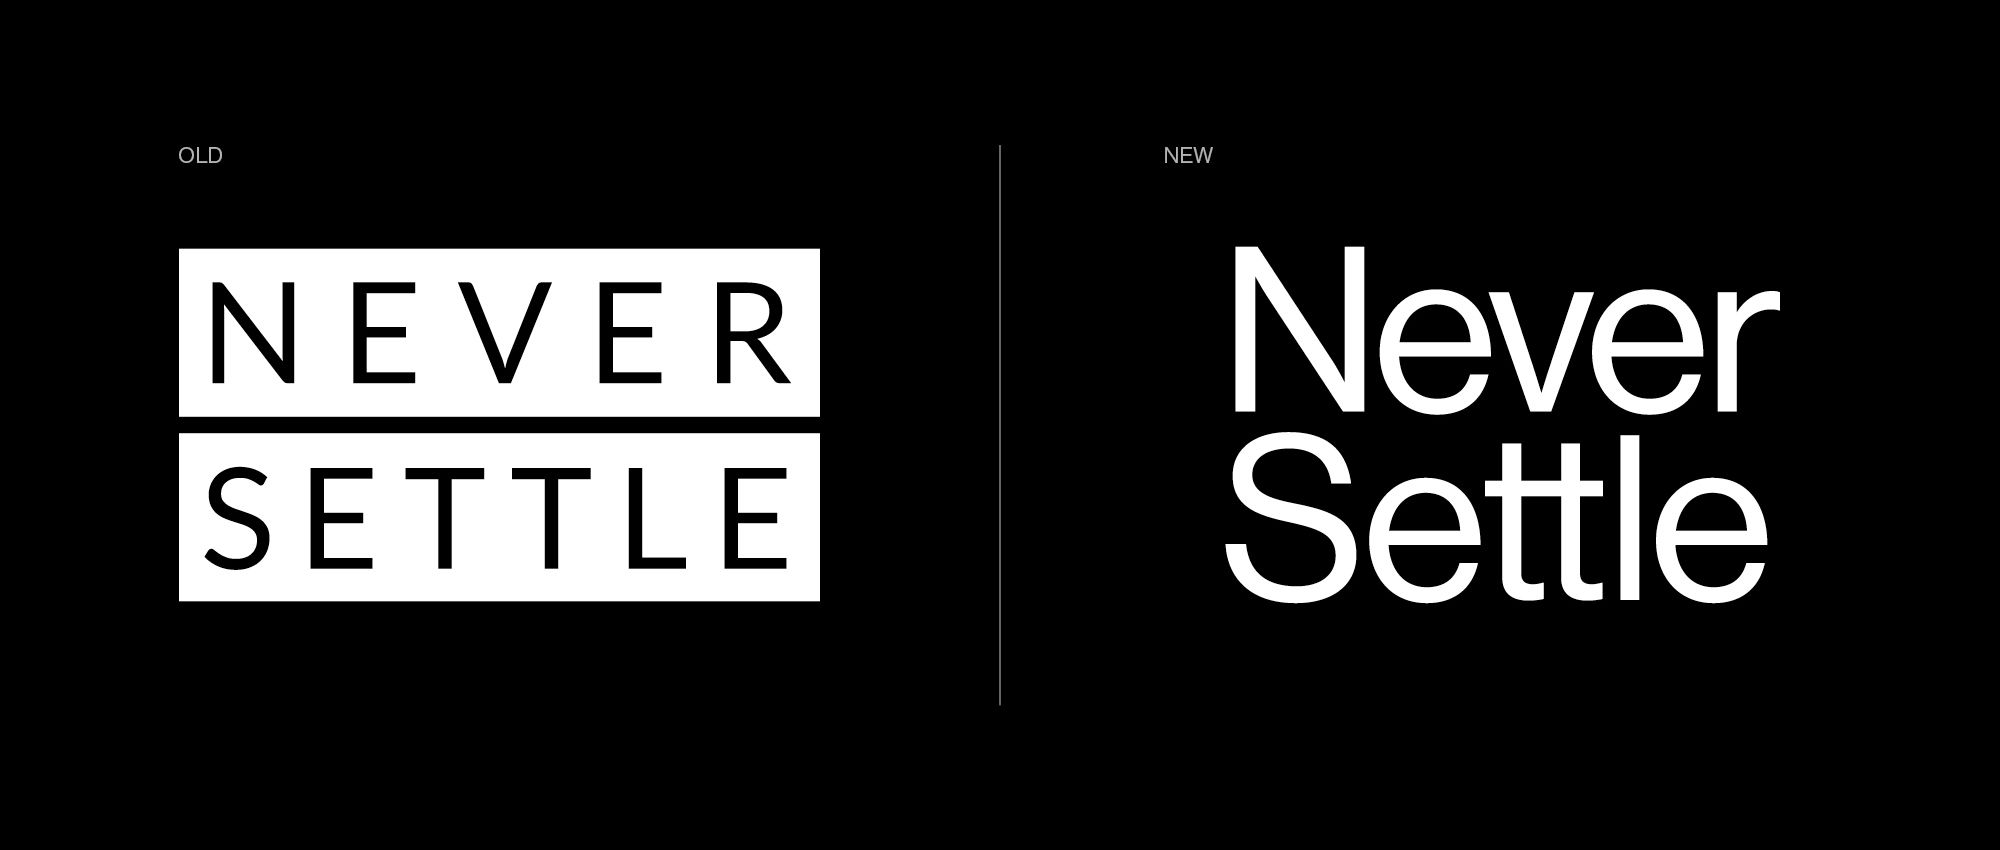 Old and New OnePlus tagline. Image: OnePlus